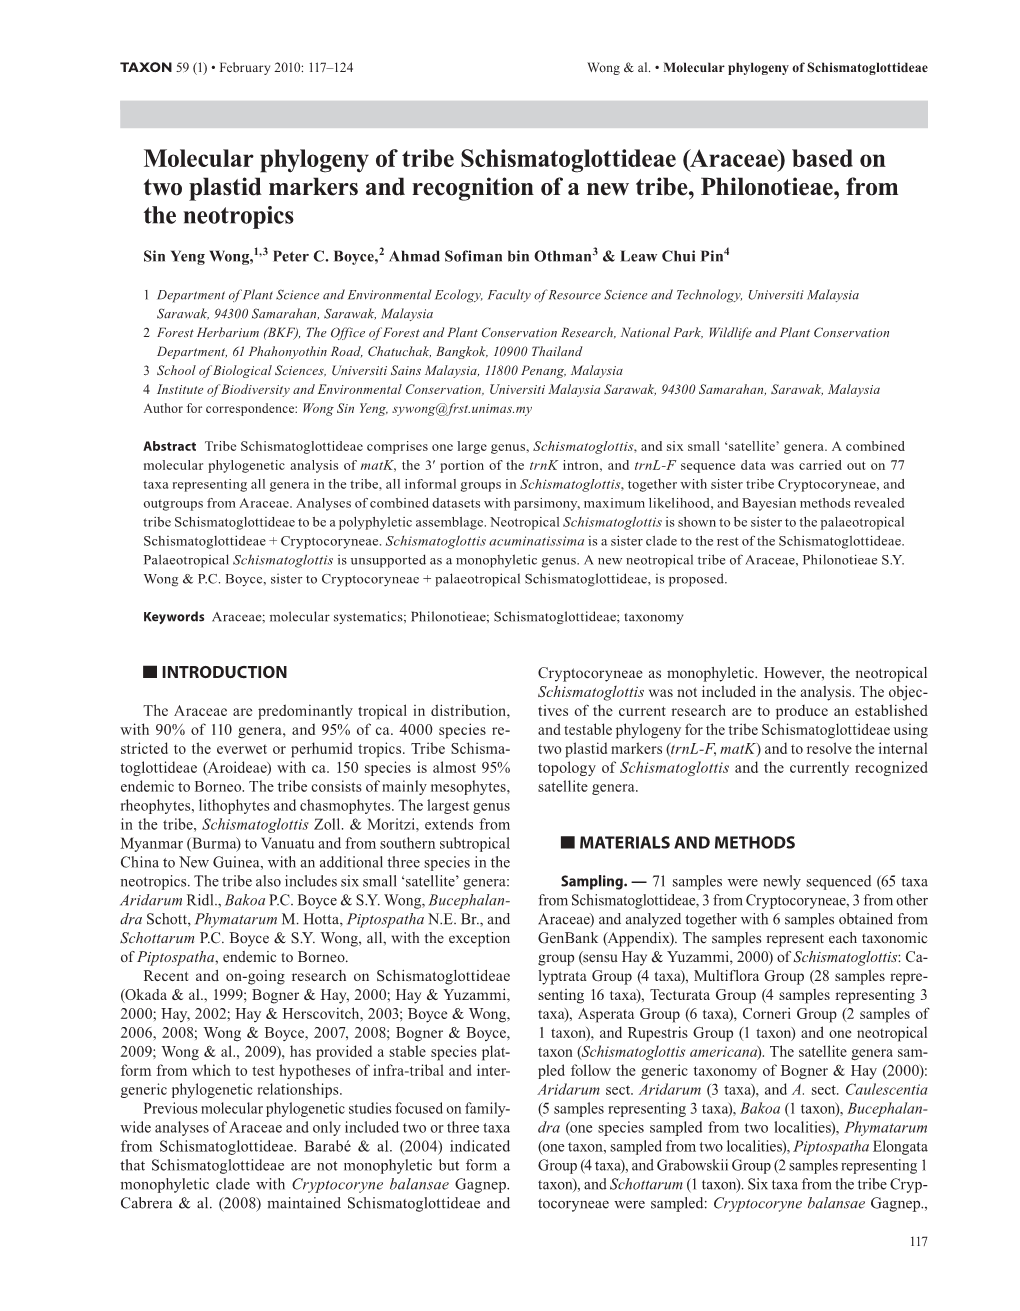 Molecular Phylogeny of Tribe Schismatoglottideae (Araceae) Based on Two Plastid Markers and Recognition of a New Tribe, Philonotieae, from the Neotropics